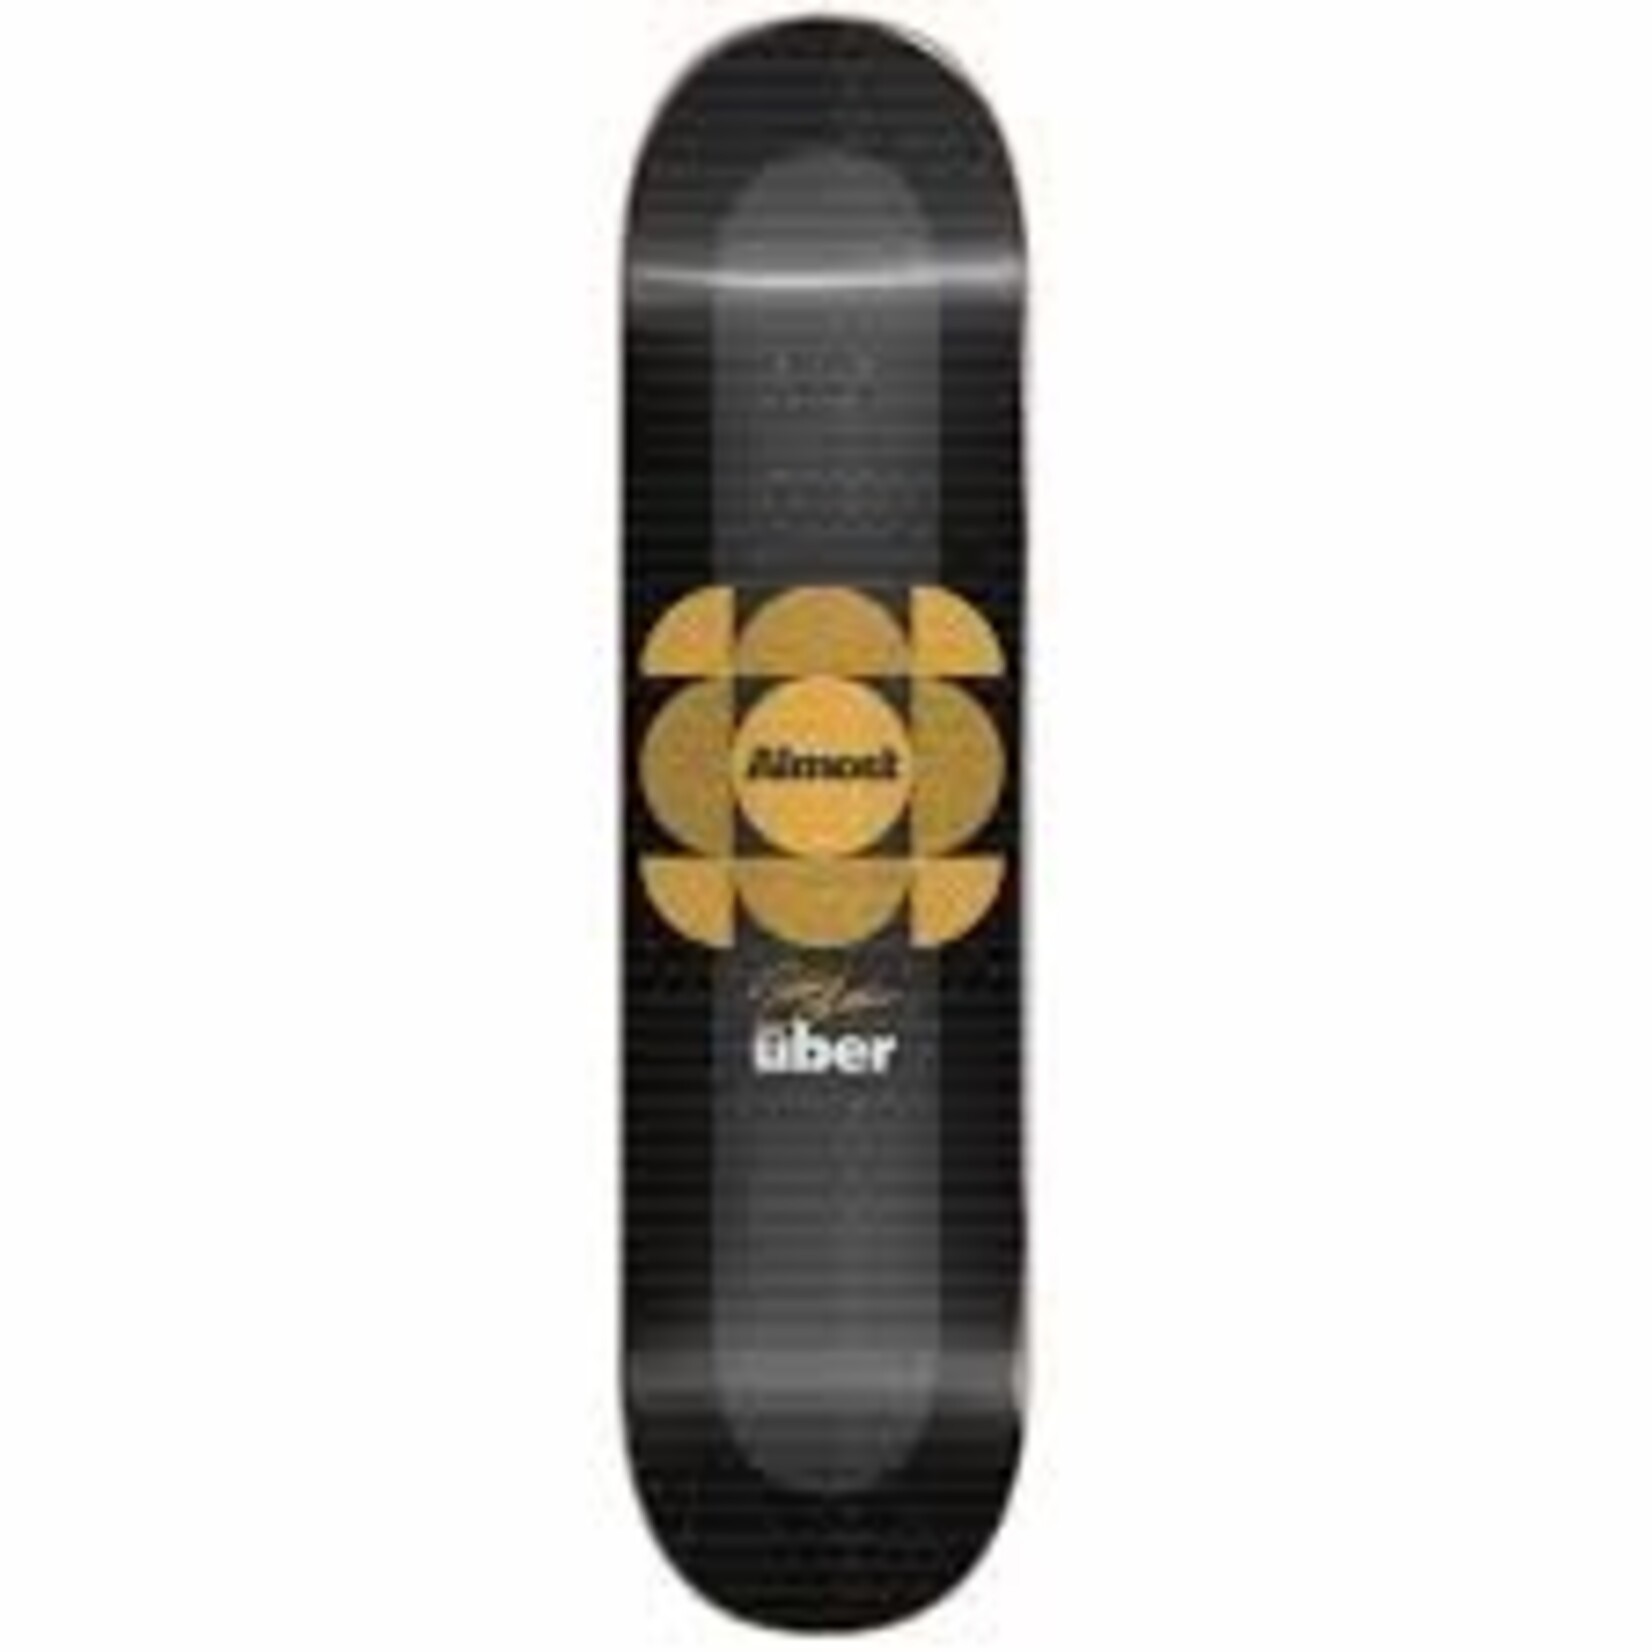 Almost Mullen Uber Expanded Deck 8.25"